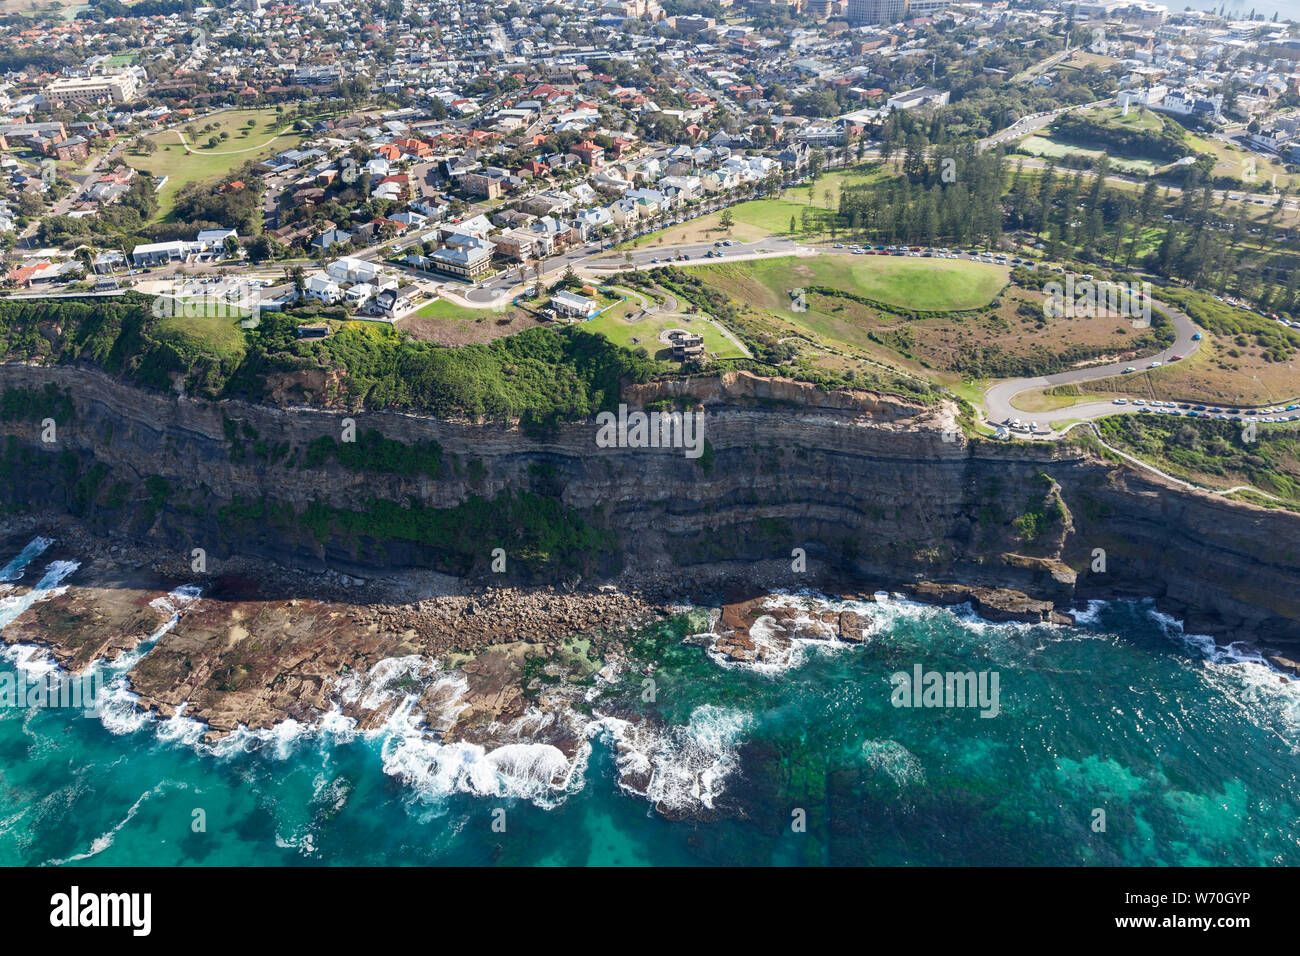 Aerial view of the cliff line at King Edward Park and 'The Hill' area of Newcastle NSW Australia. Stock Photo